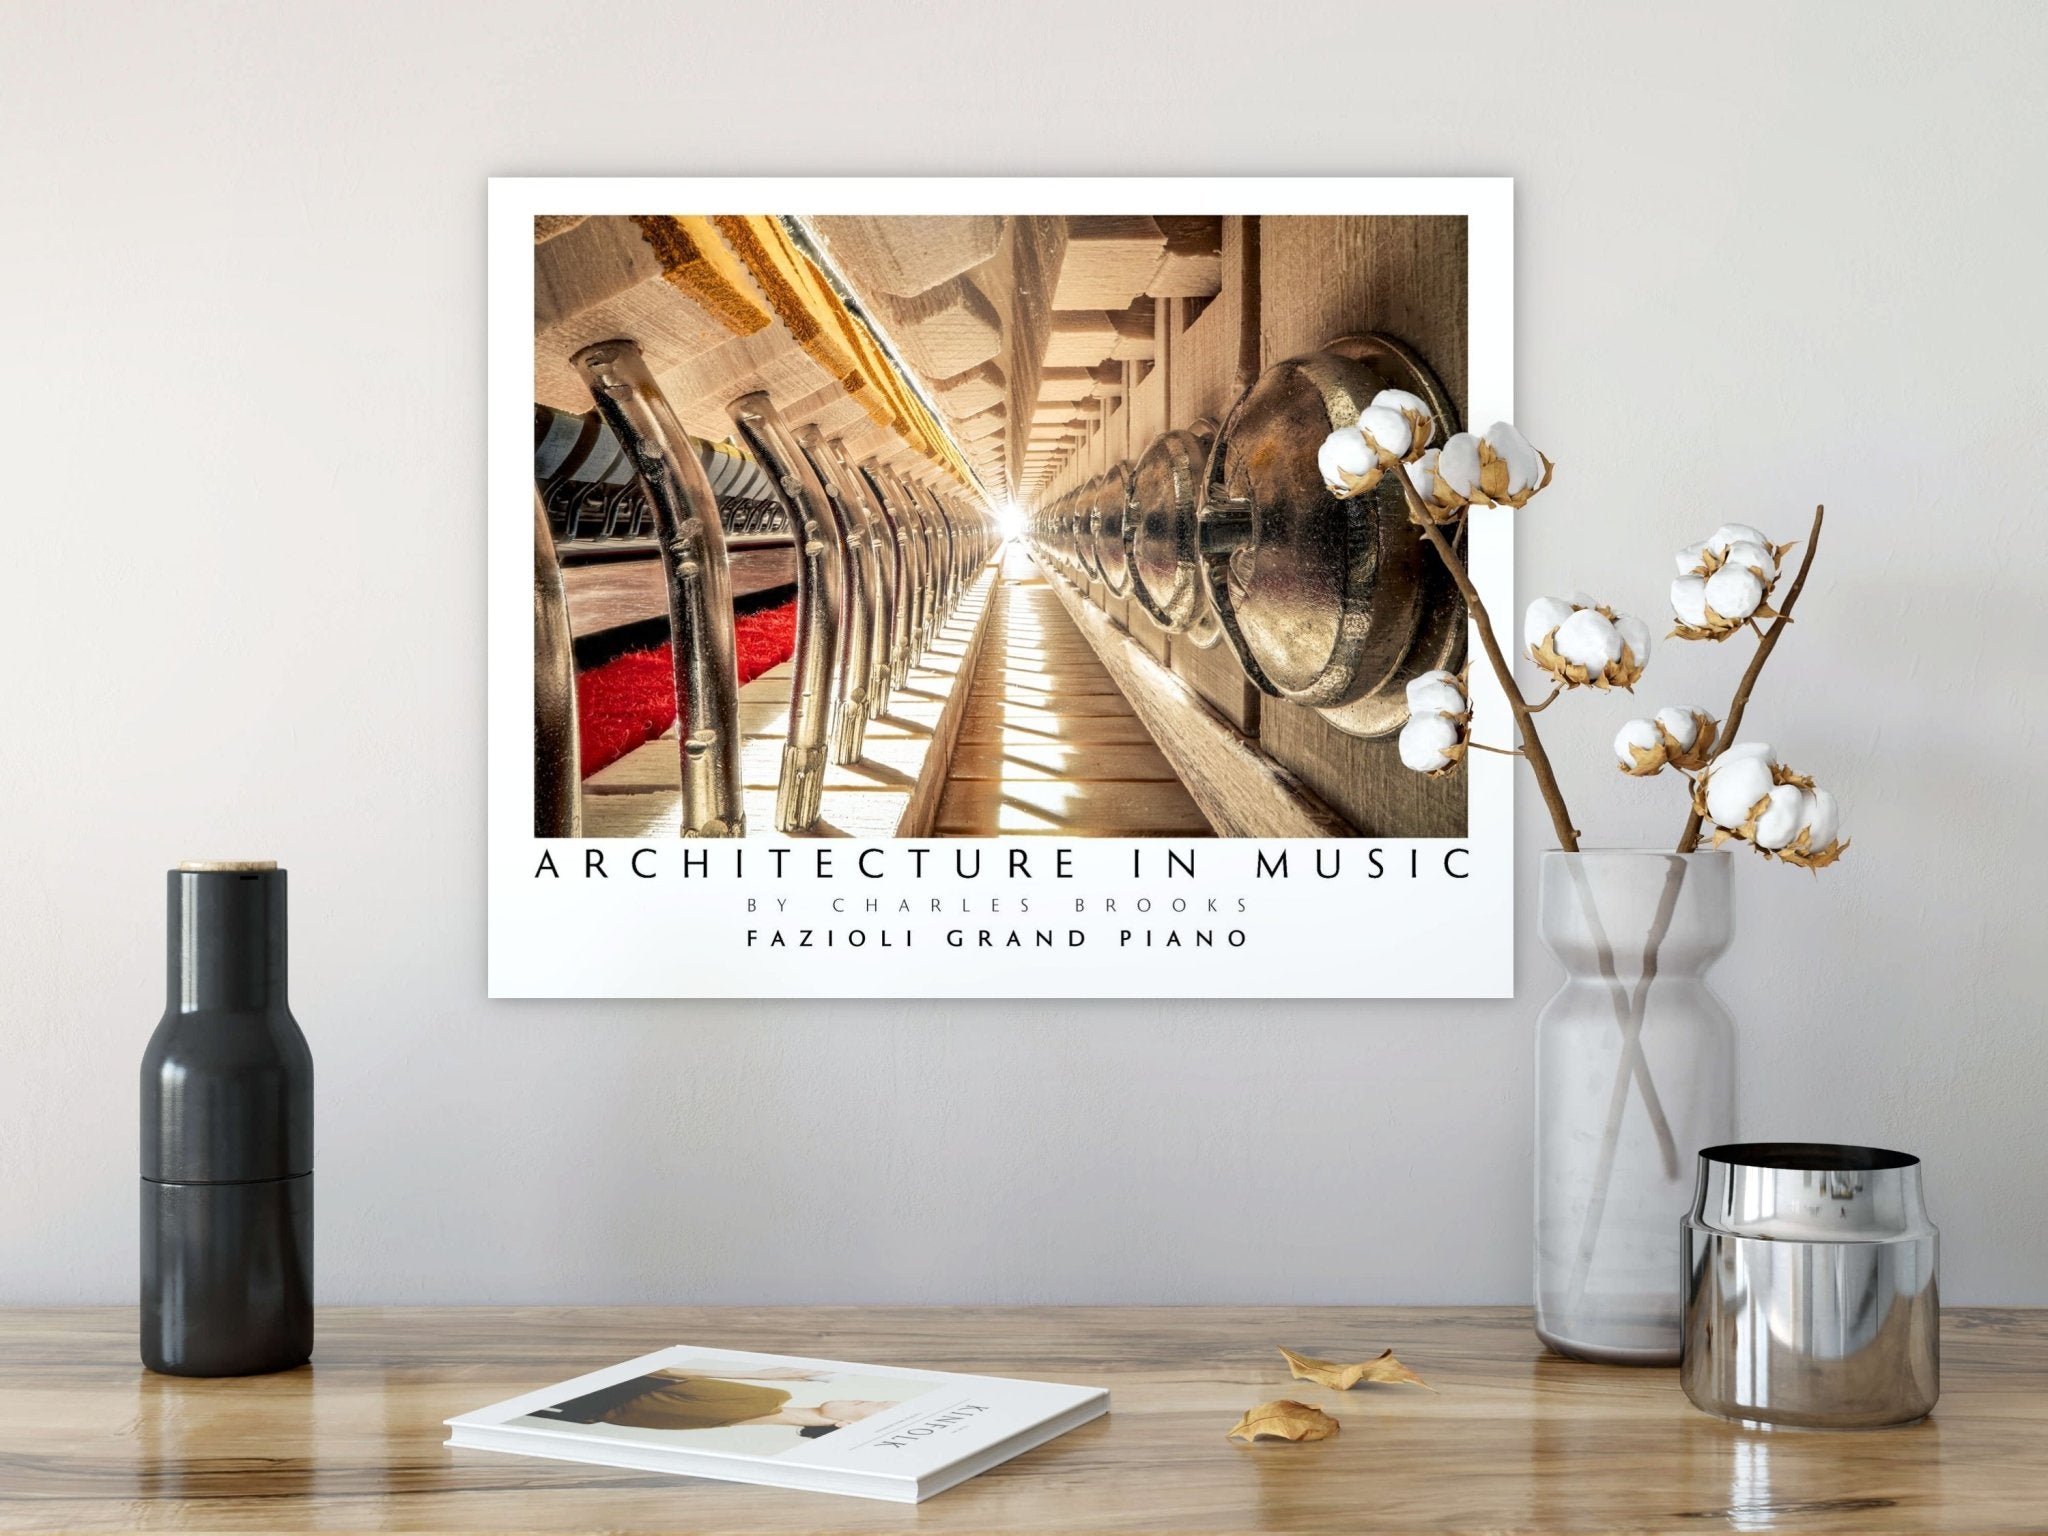 Photo of Fazioli Grand Piano Part 2. High Quality Poster. - Giclée Poster Print - Architecture In Music